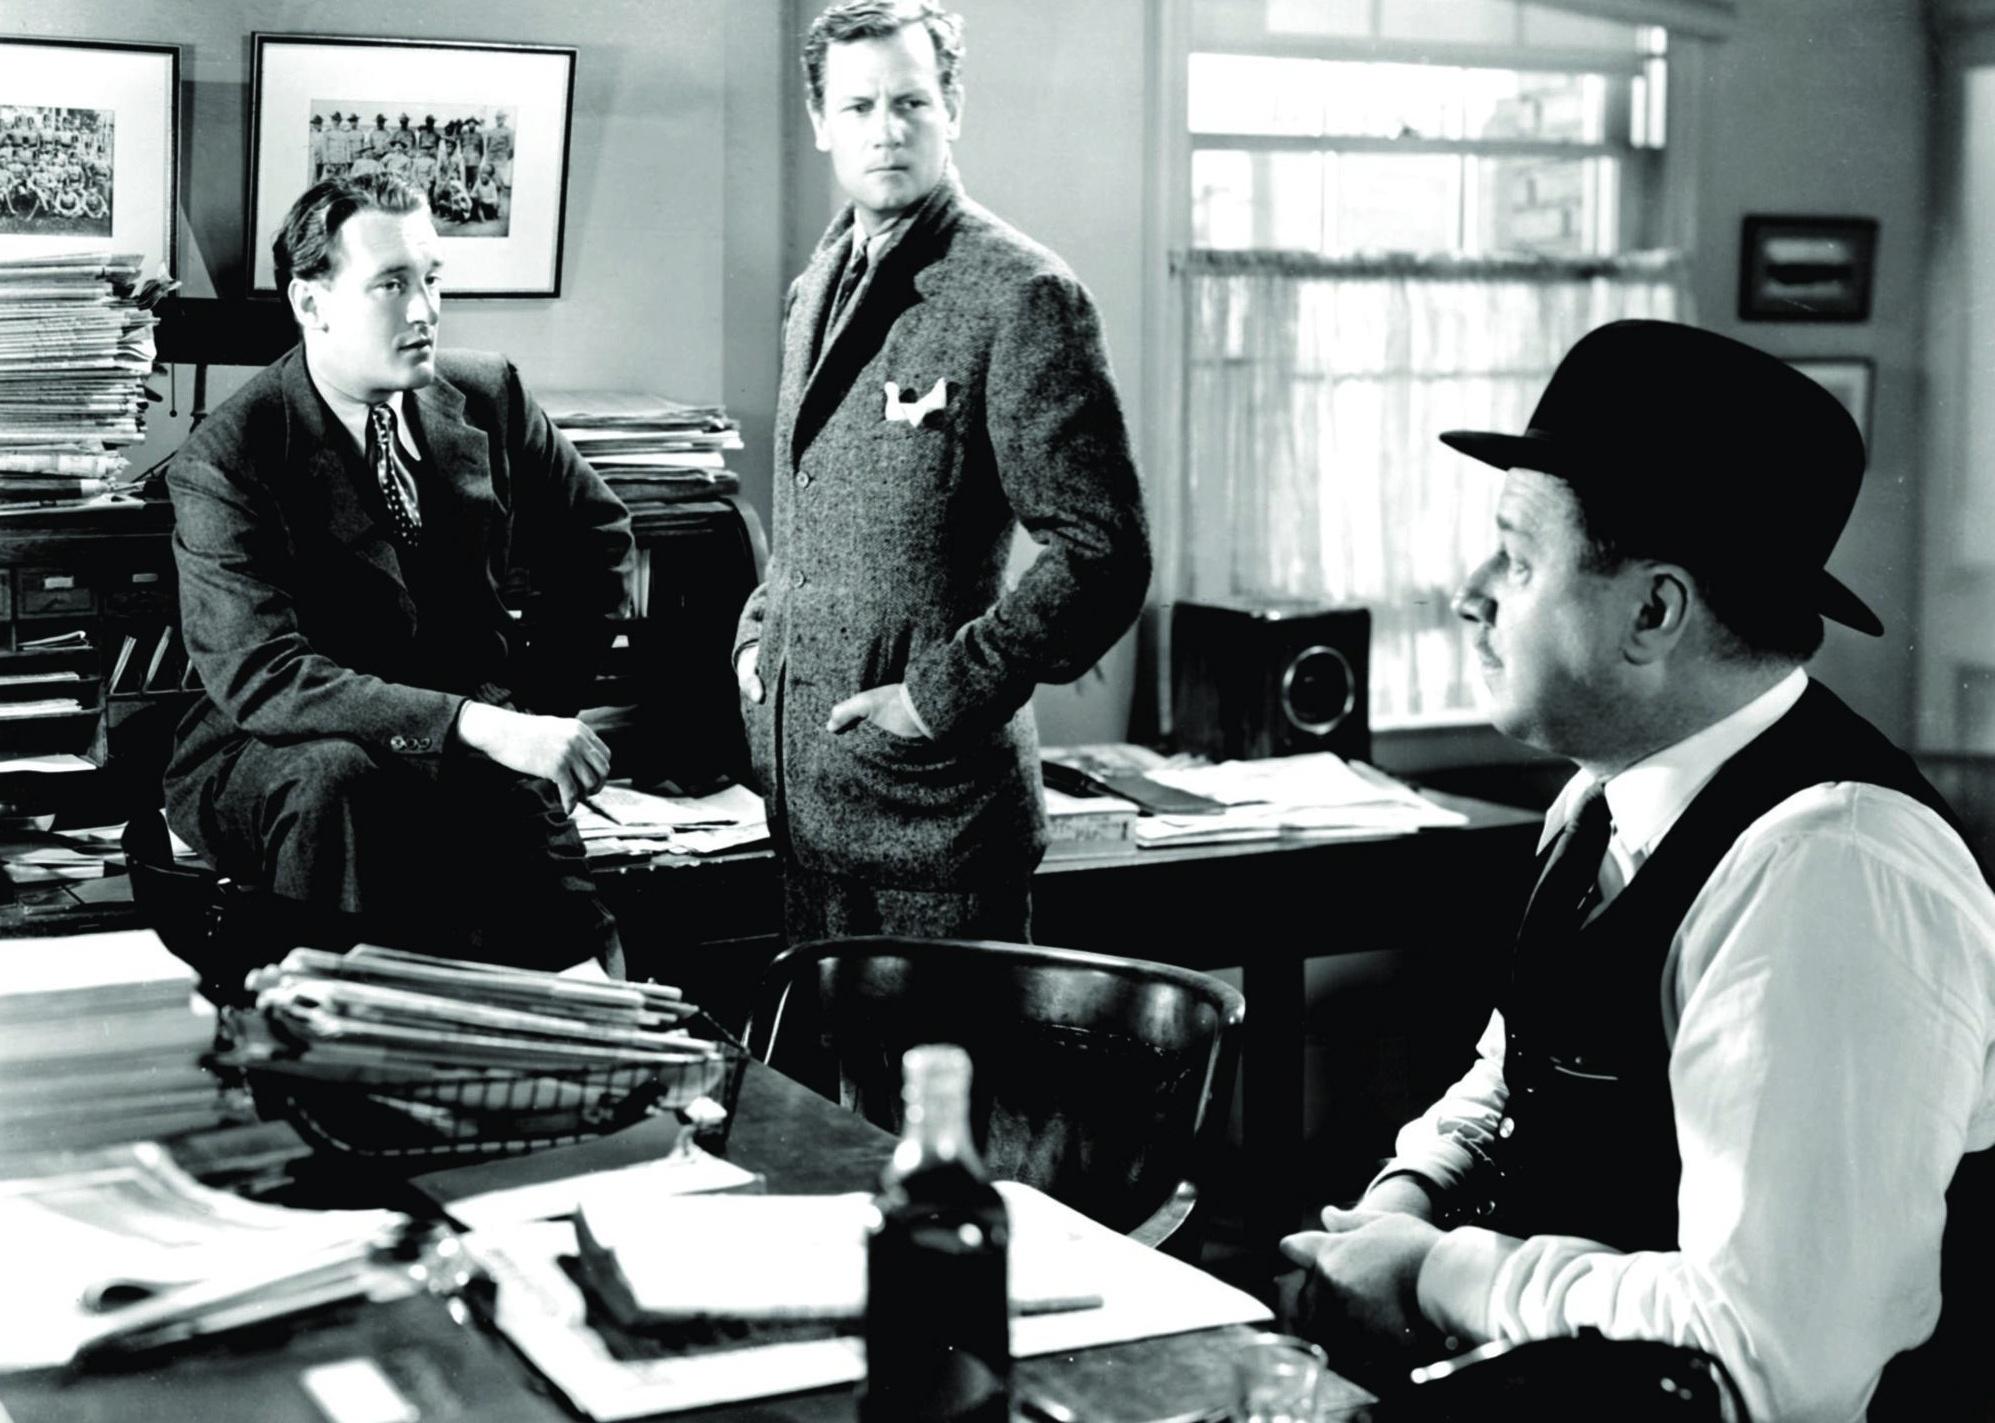 Two men in suits talk with a man sitting at a desk wearing a top hat.